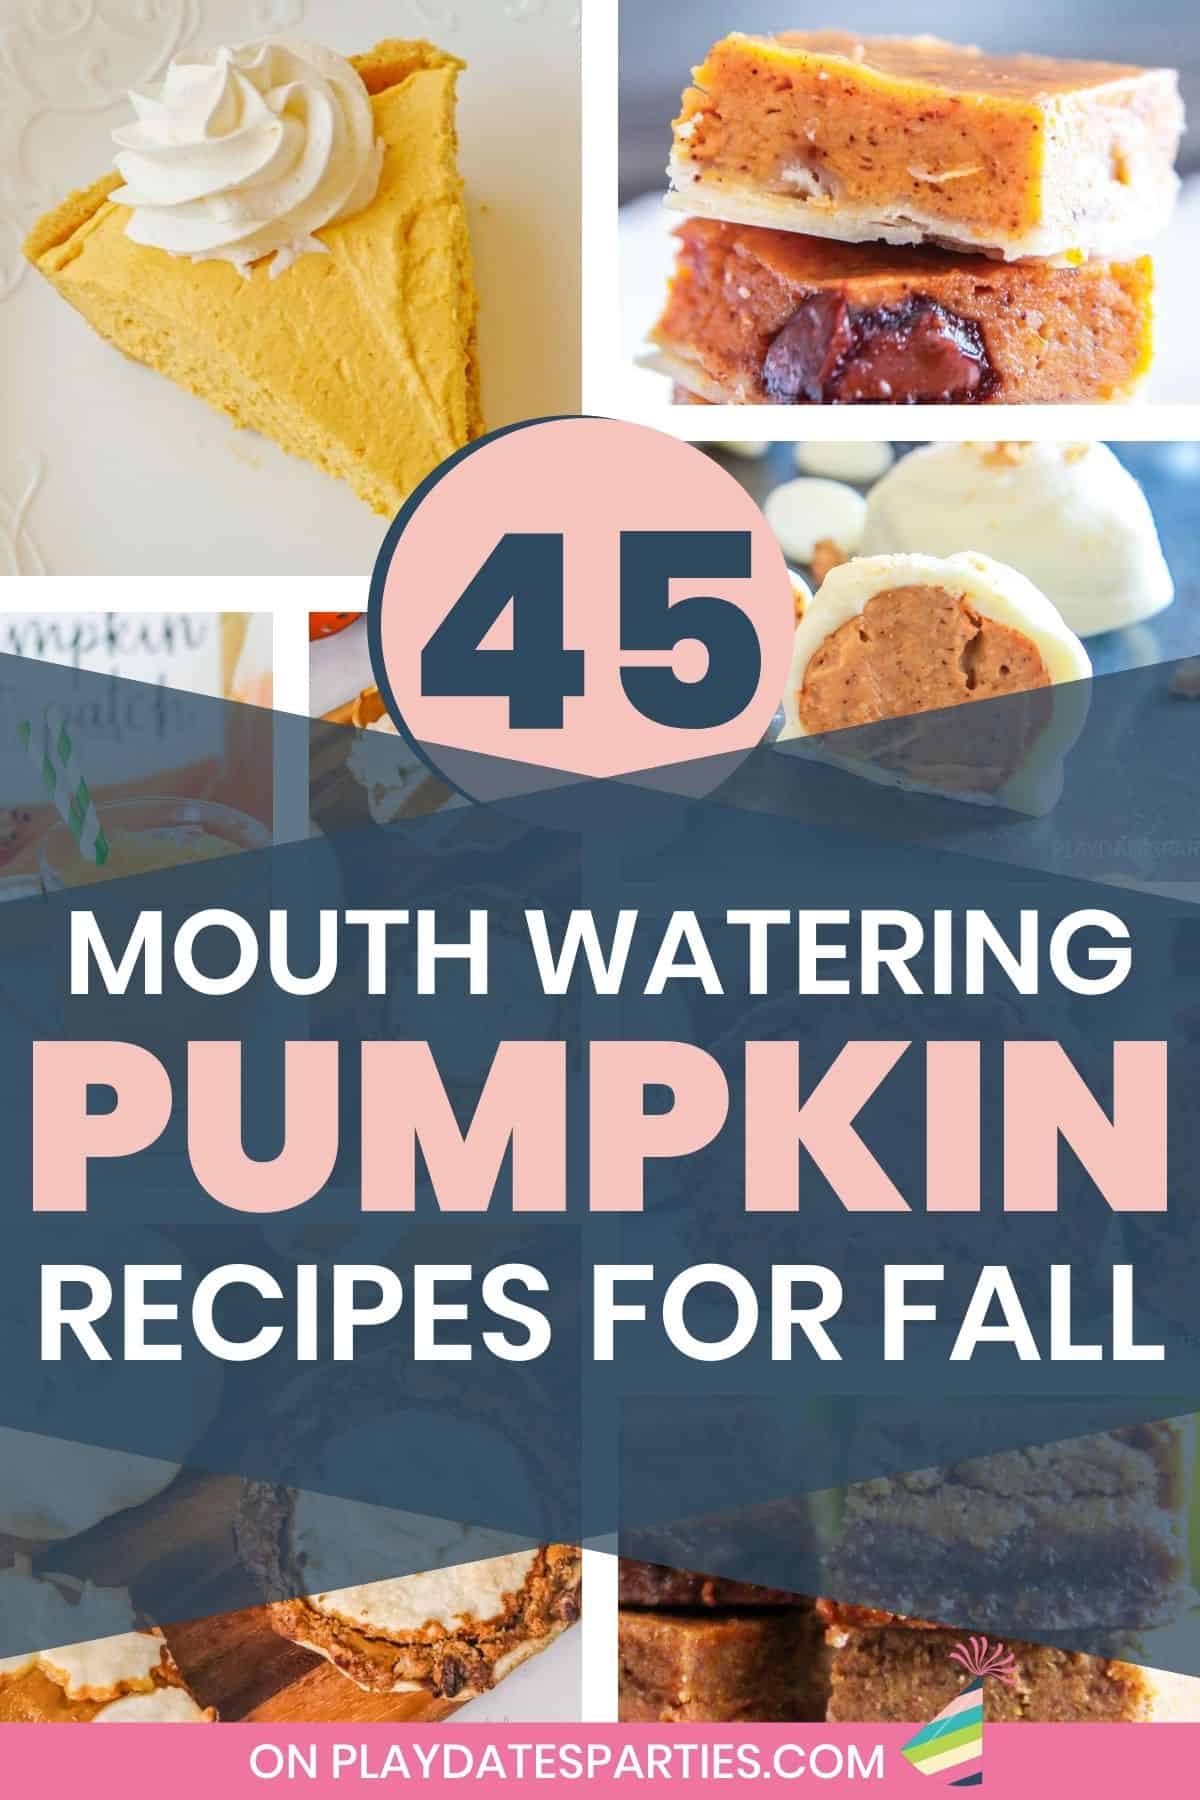 A collage of recipes with pumpkin spice; including pie, pumpkin truffles, drinks and pumpkin bars.